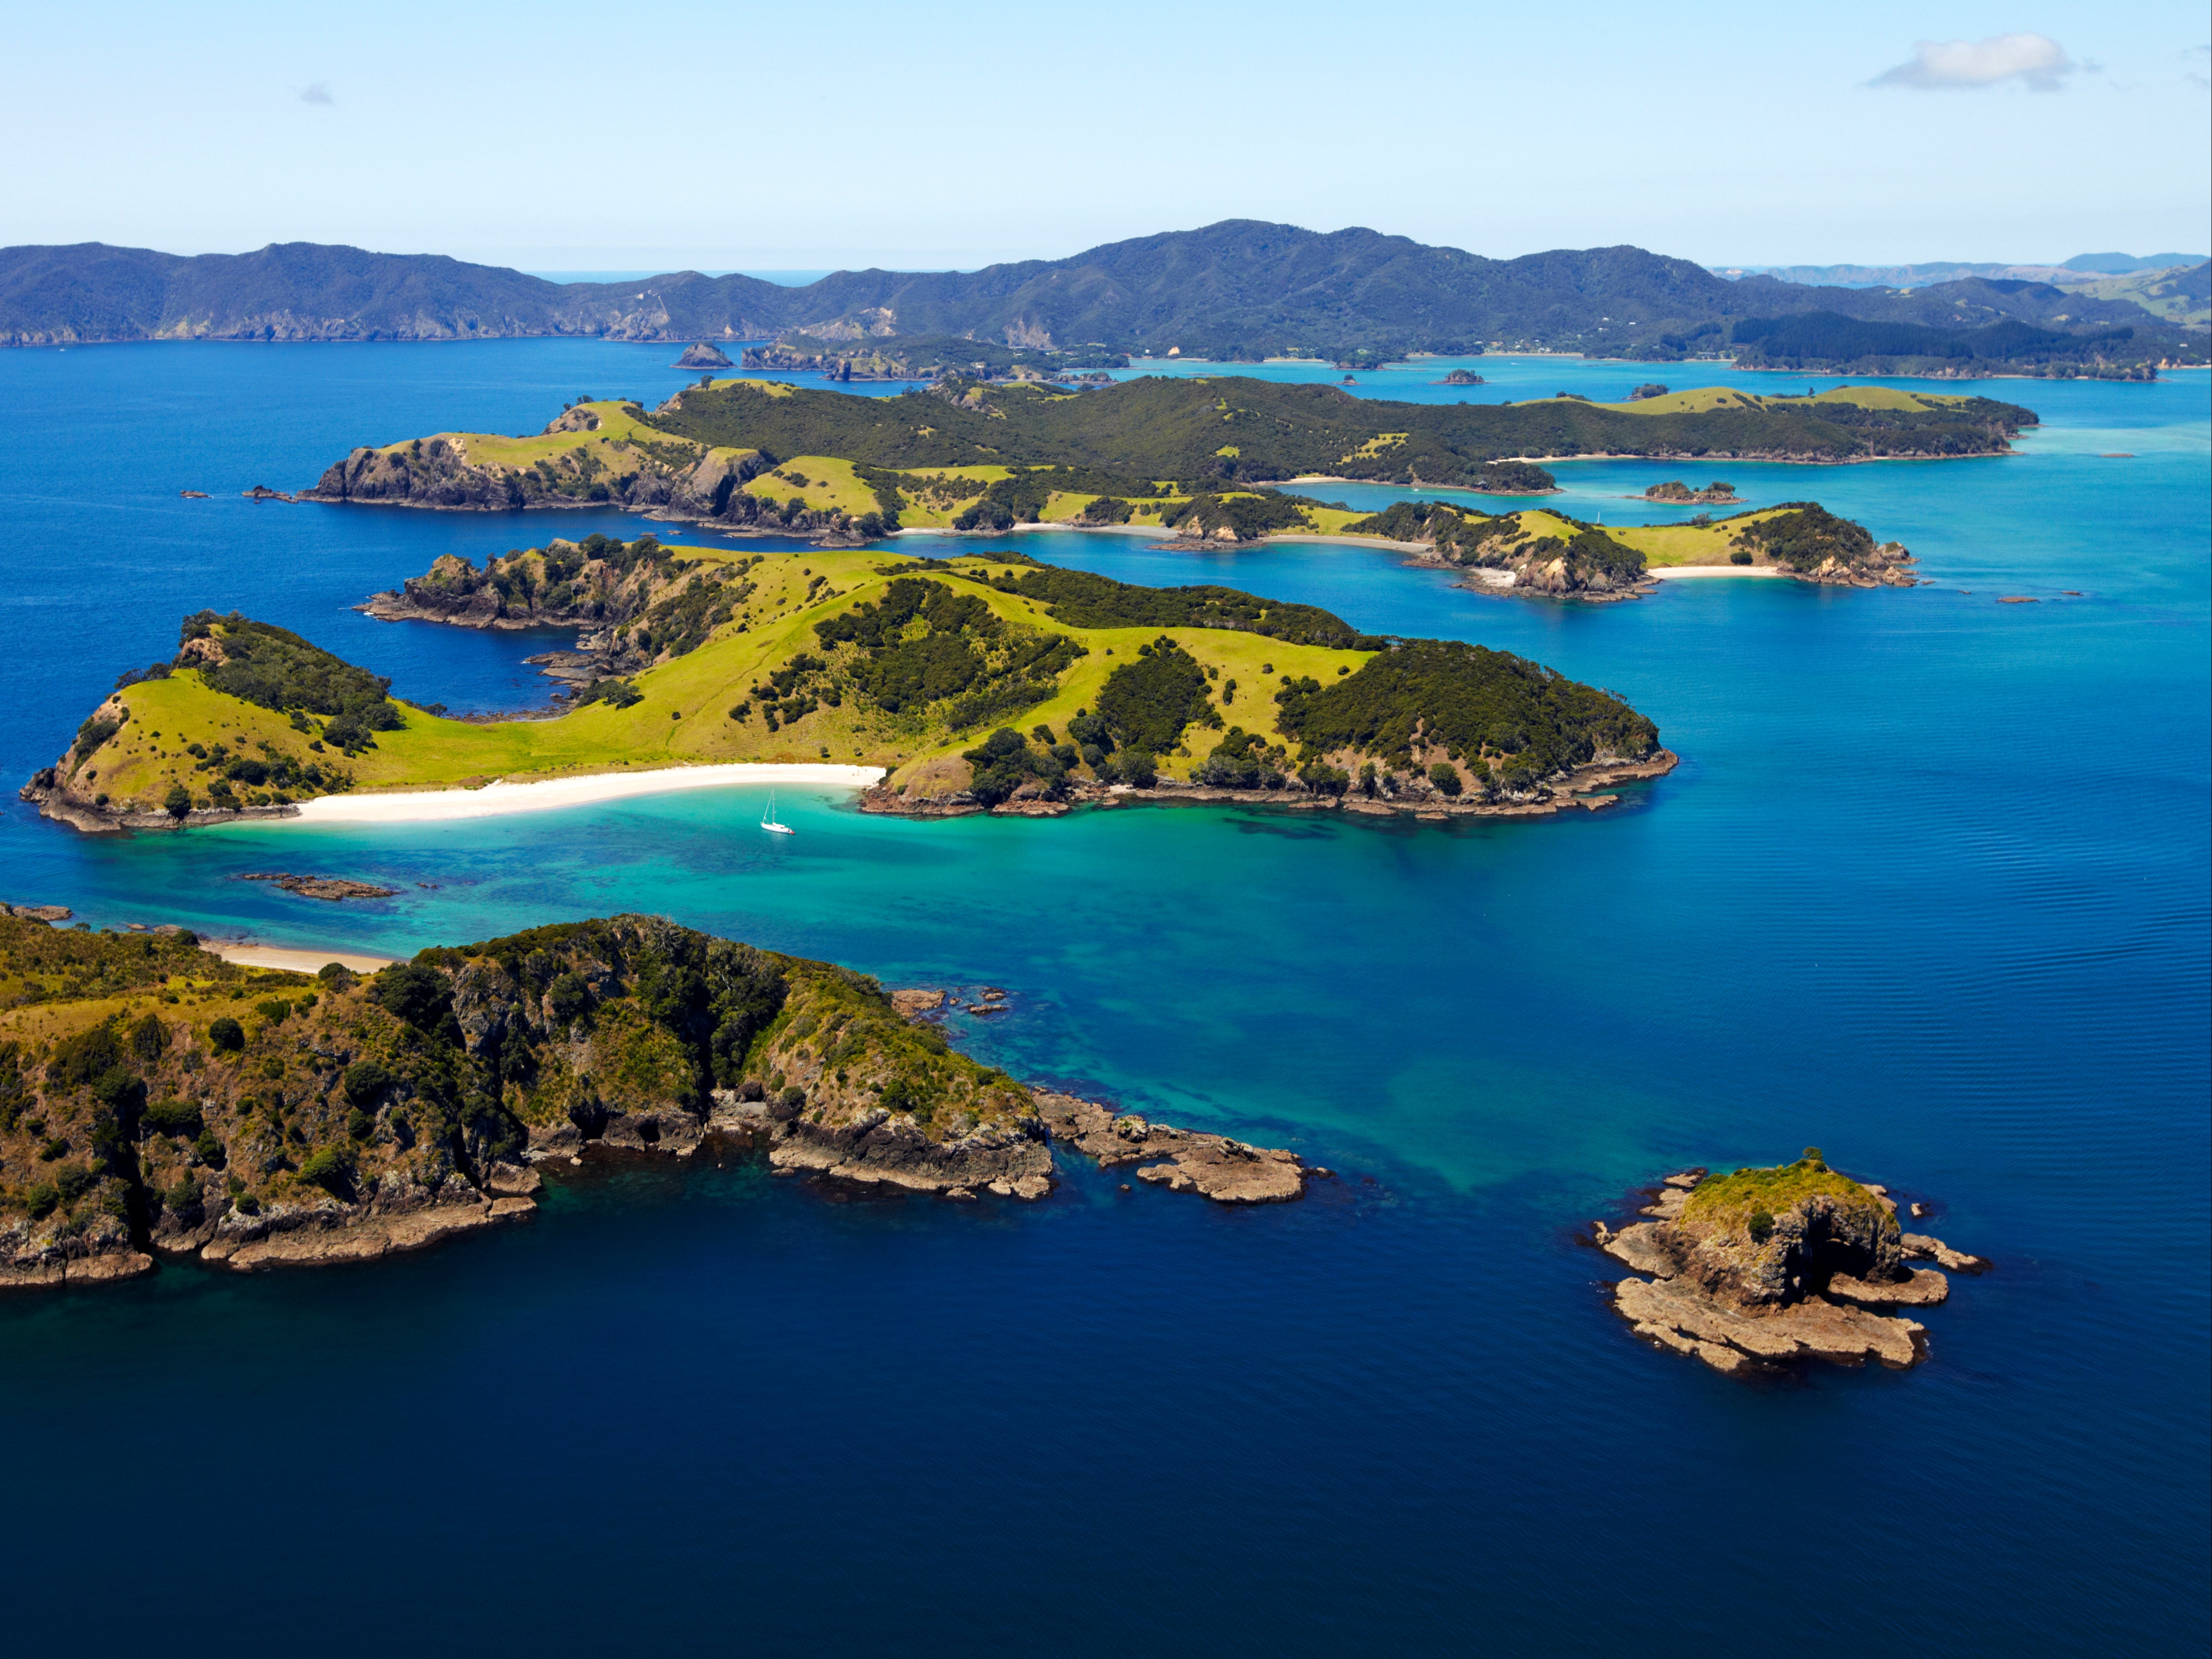 Opening up: the Bay of Islands in New Zealand’s North Island